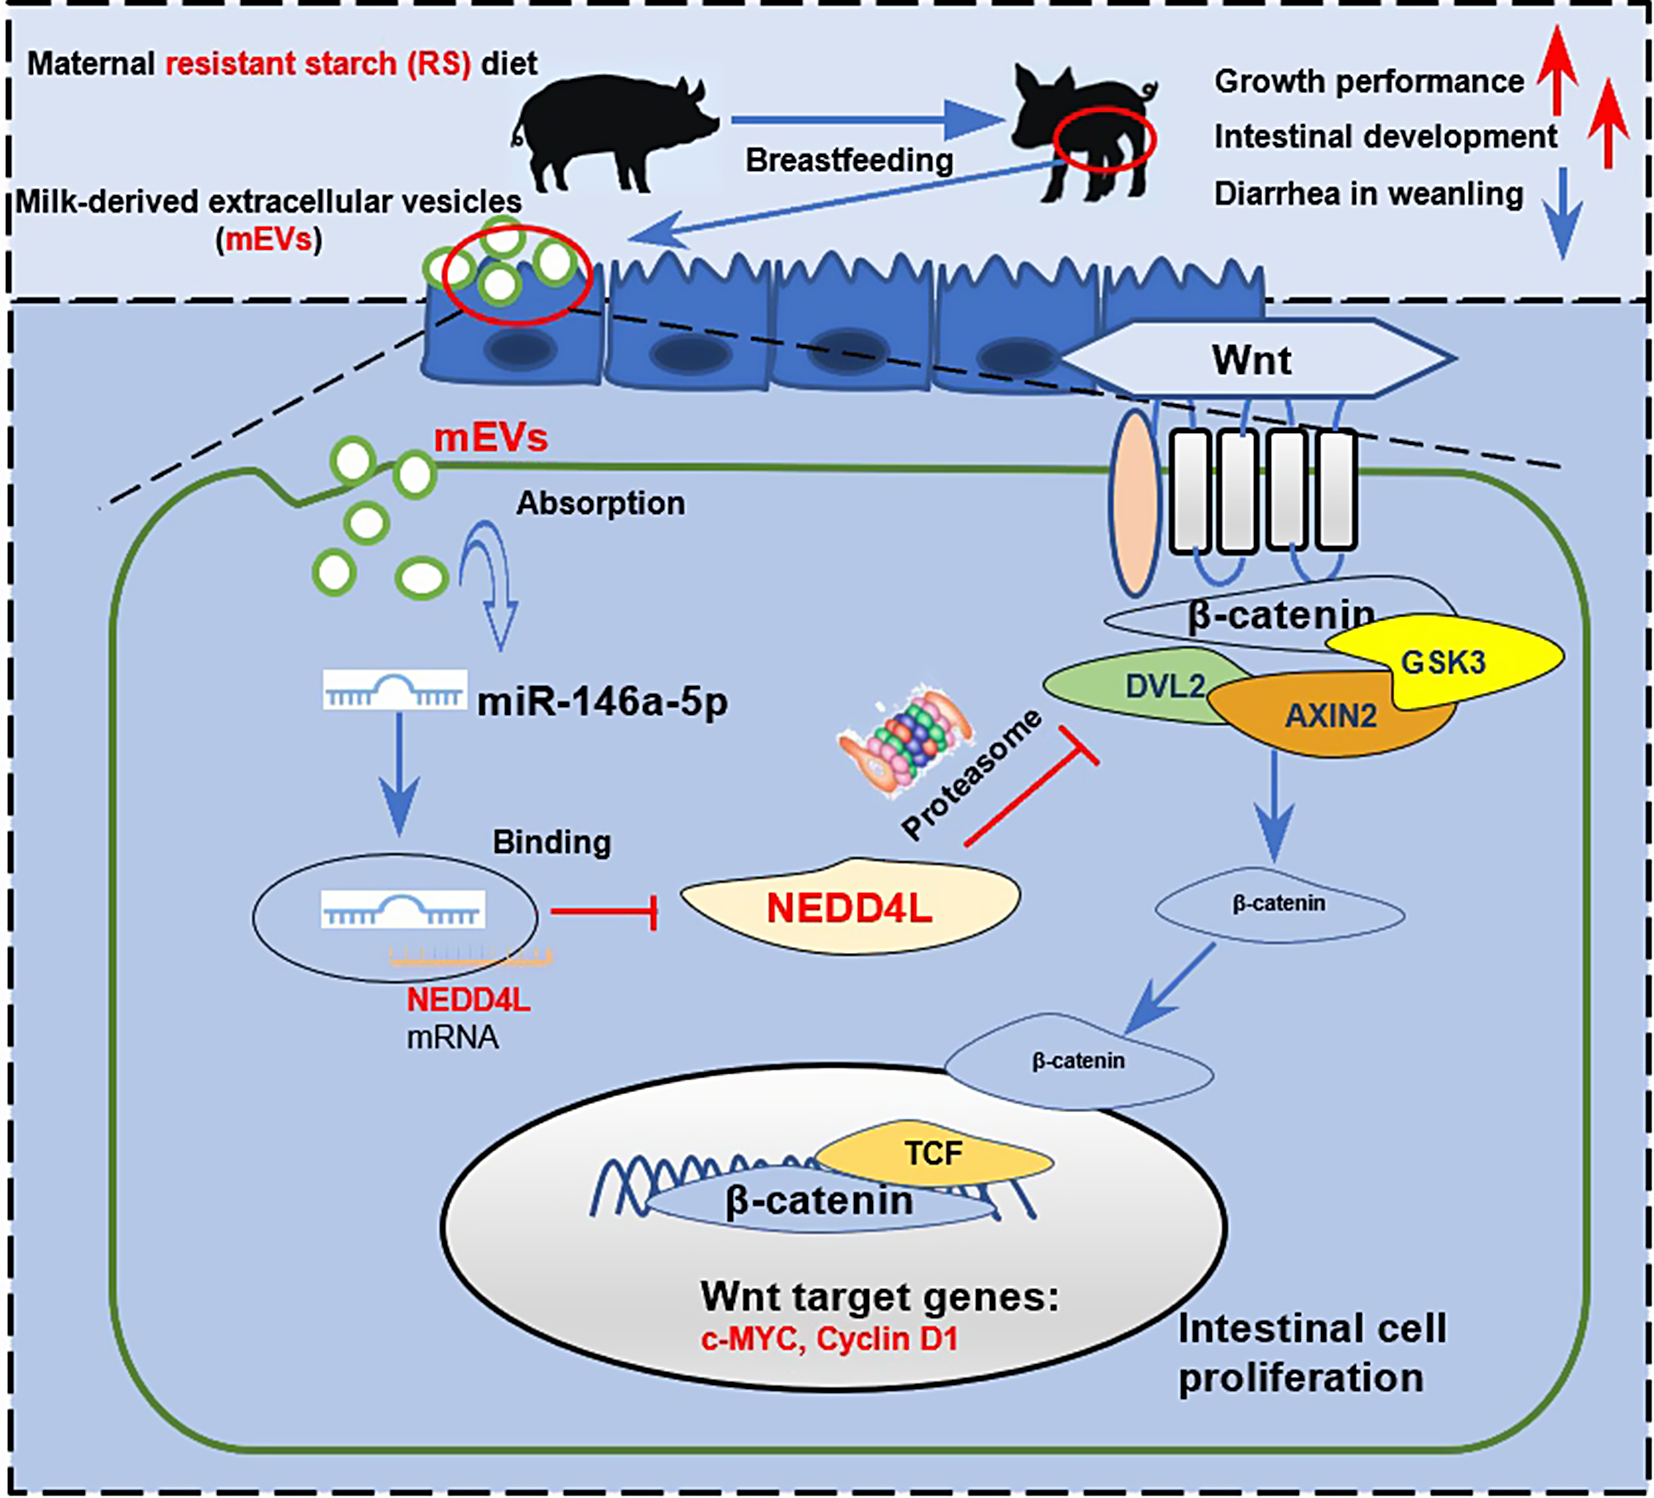 Maternal fiber-rich diet promotes early-life intestinal development in offspring through milk-derived extracellular vesicles carrying miR-146a-5p